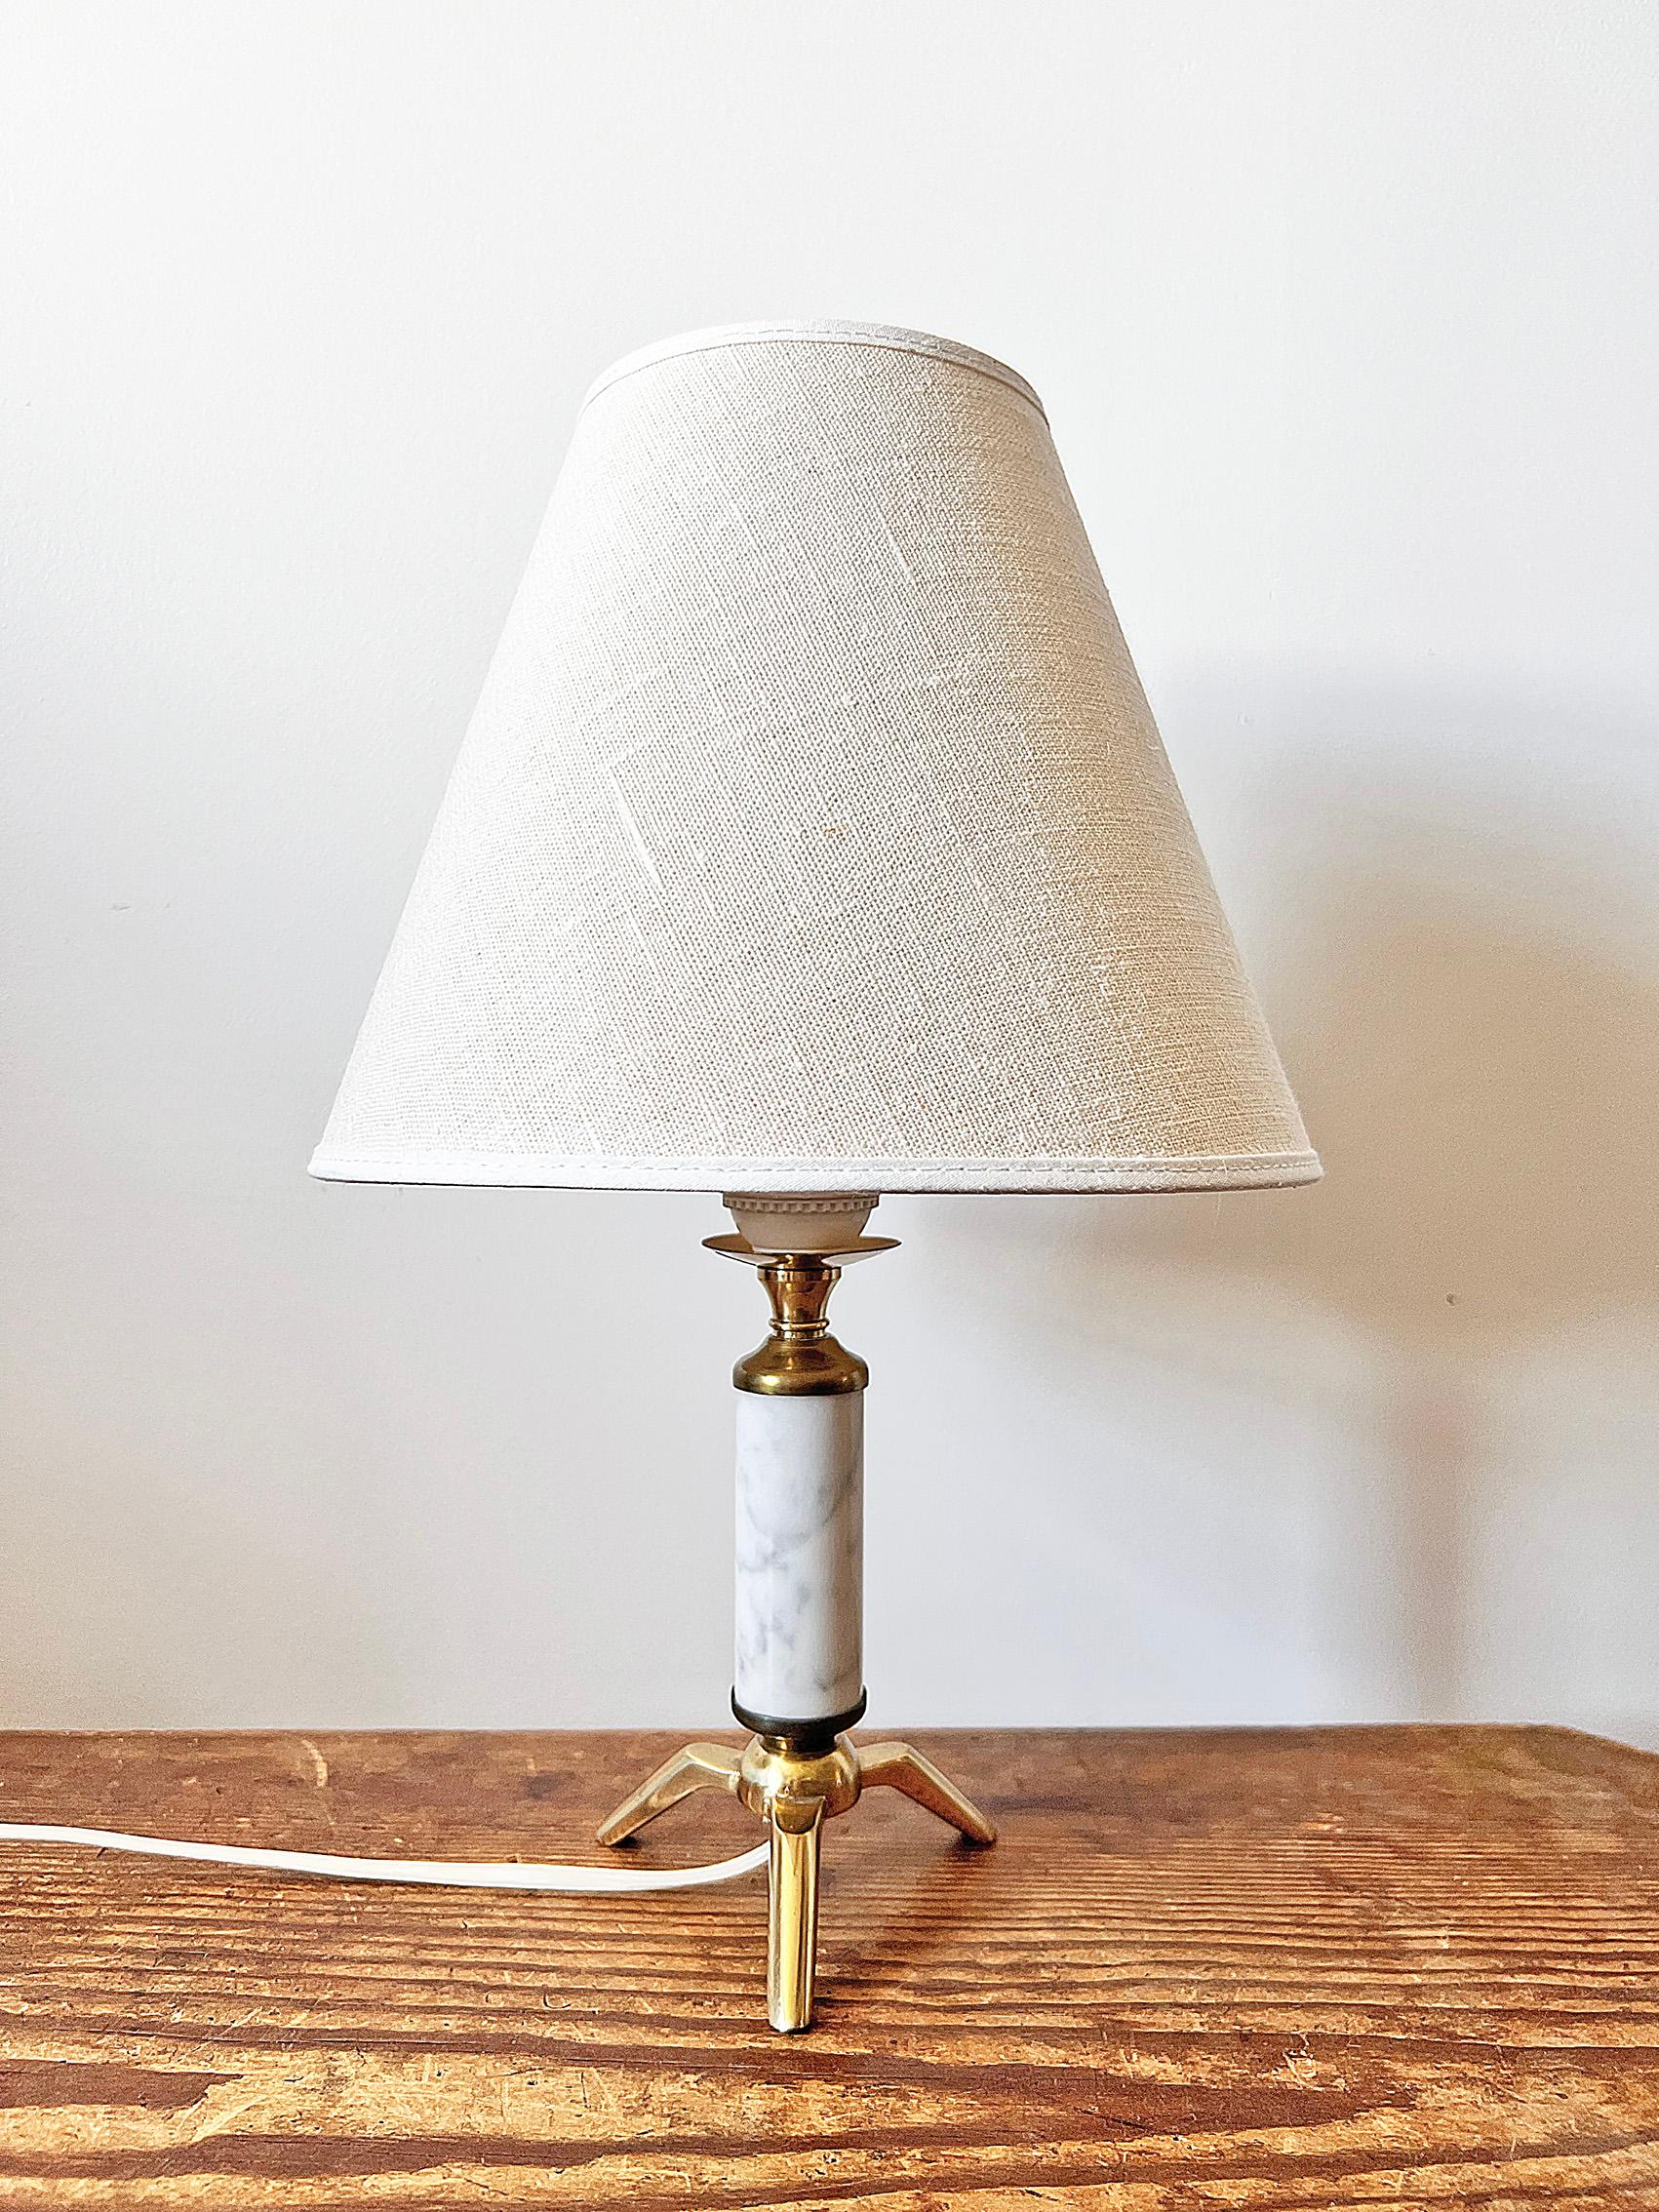 Rare little table lamp in brass and marble by Falkenbergs Belysning, Sweden, ca 1960 - 1970's.
Signed with makers mark.
Condition: wear consistent with age and use. Brass patina. Smaller marble chips on the base line (see last picture). The ring